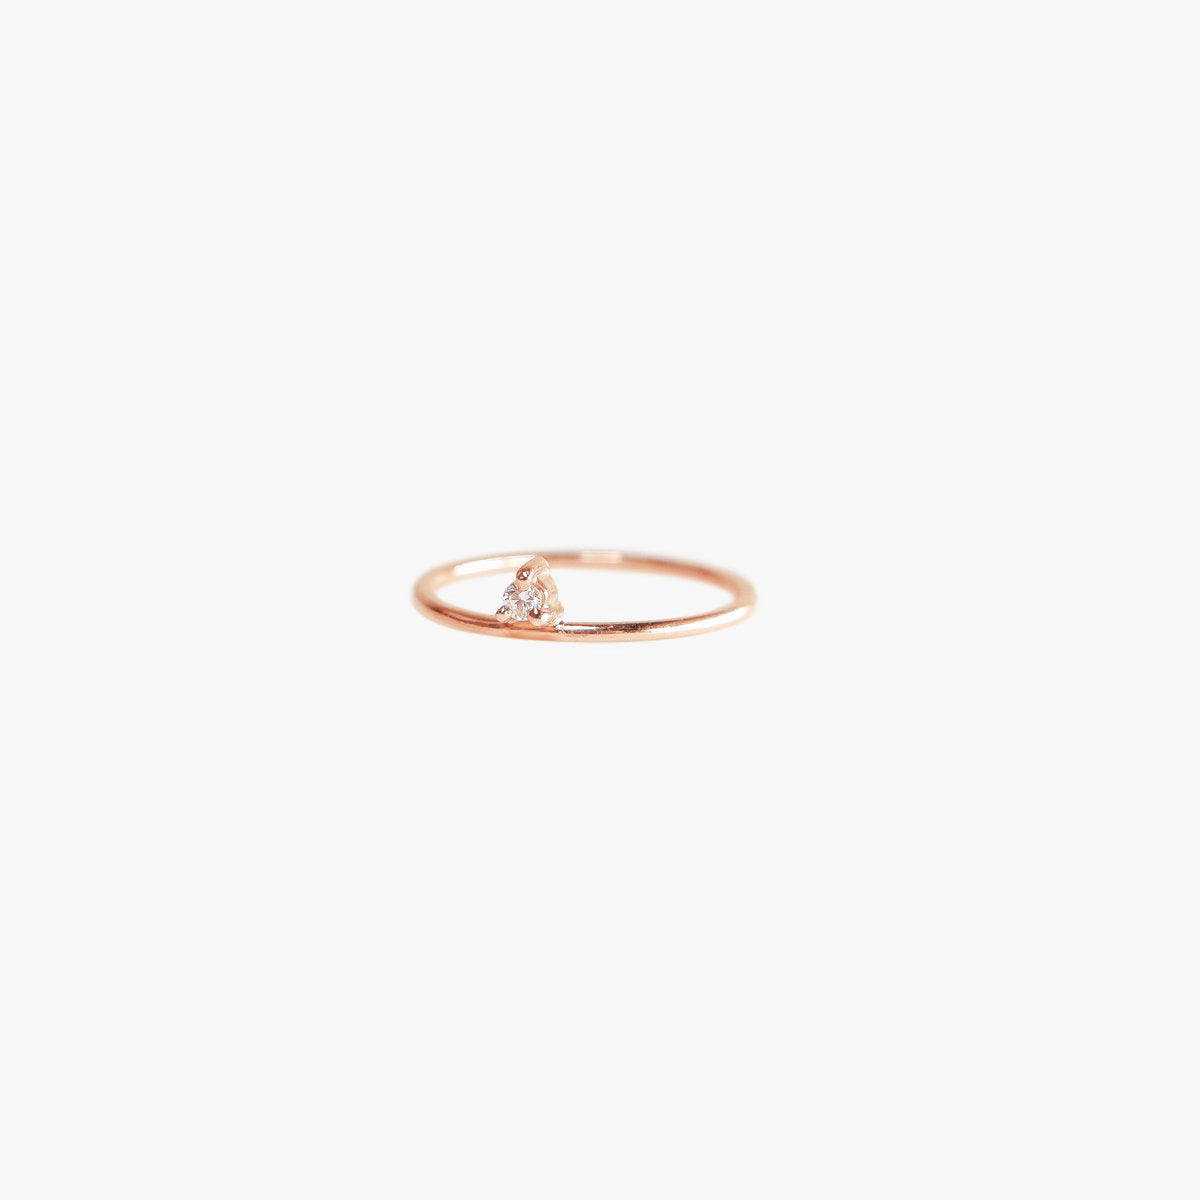 The Floating Diamond Ring in Solid Gold